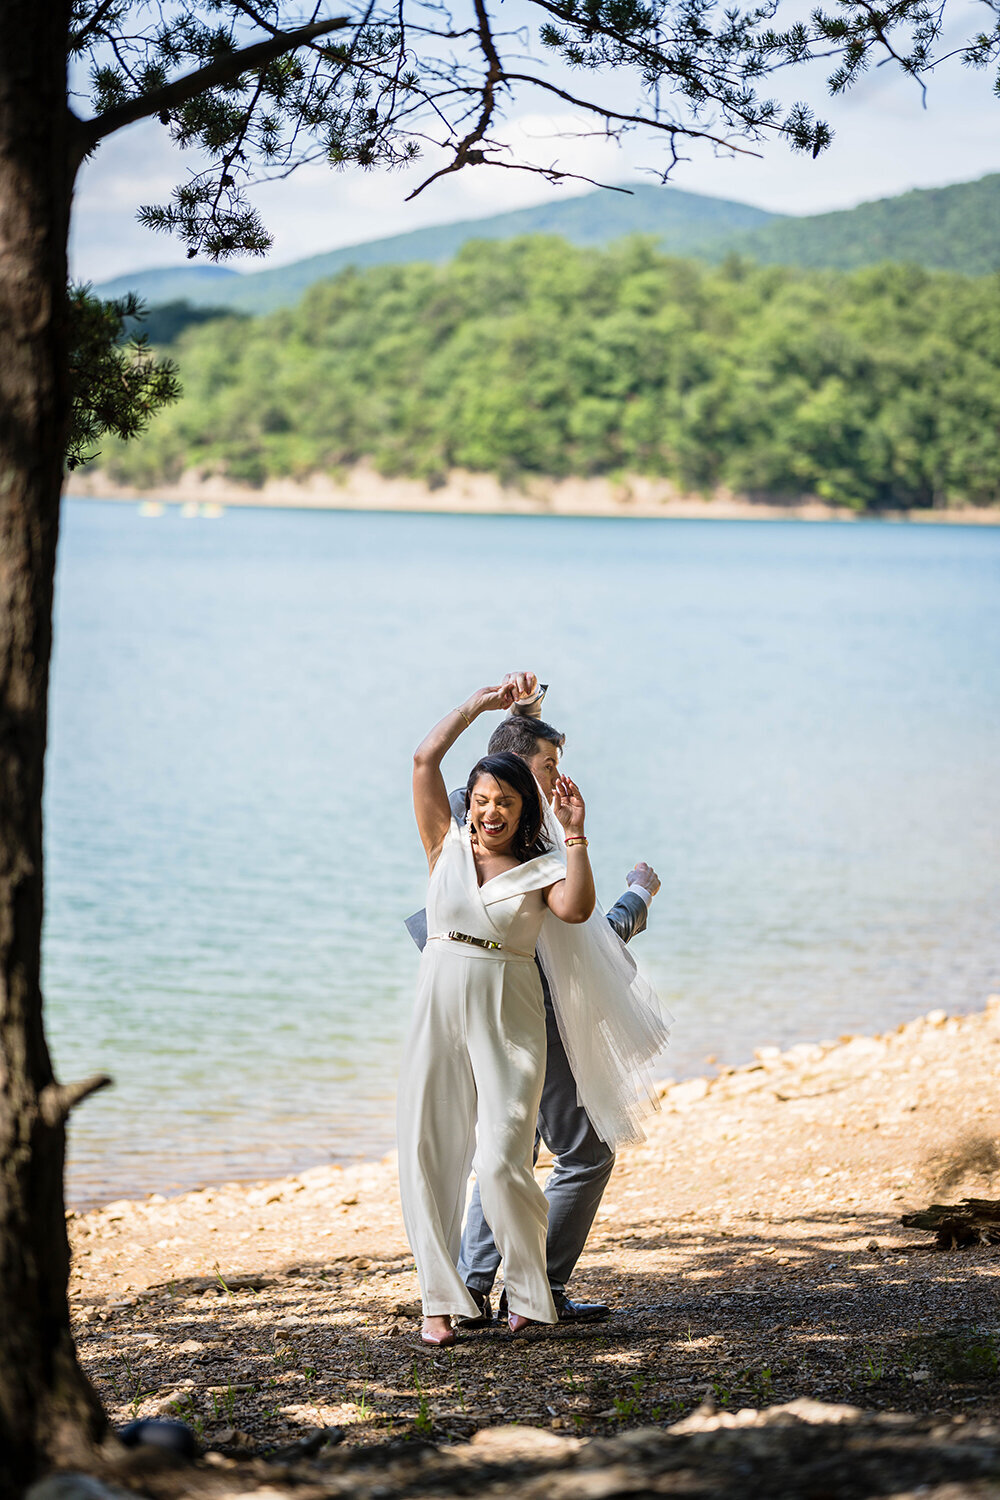 A bride and groom dance along the shores of Carvin’s Cove under a canopy of trees and with the rolling hills of Southwest Virginia behind them. The groom watches closely as they both turn and the bride laughs.